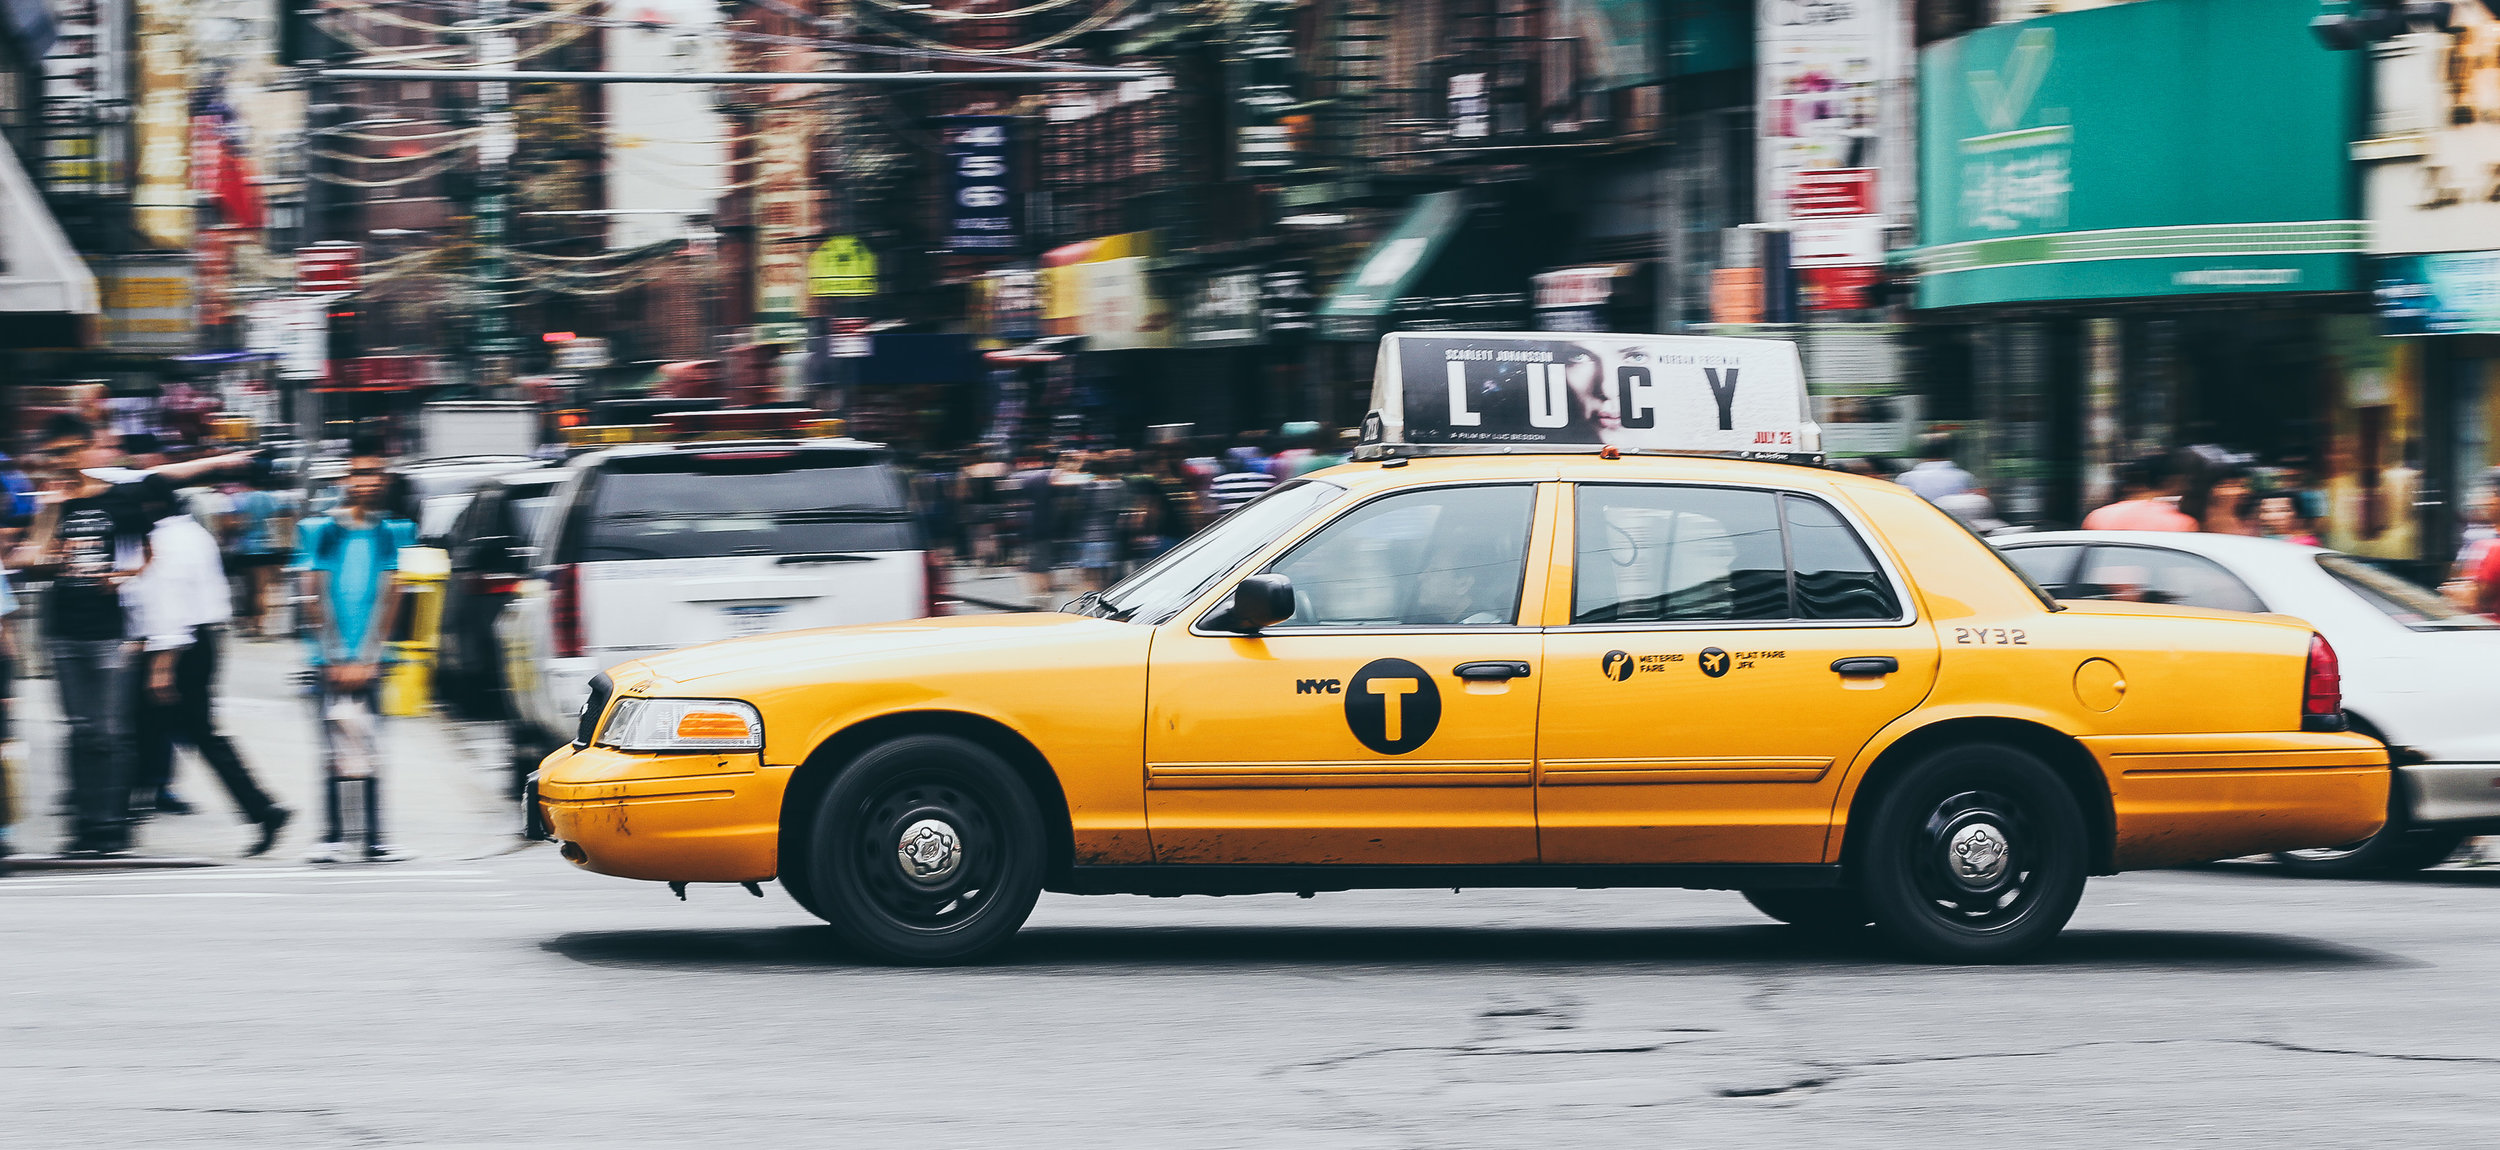 New York taxi NYC